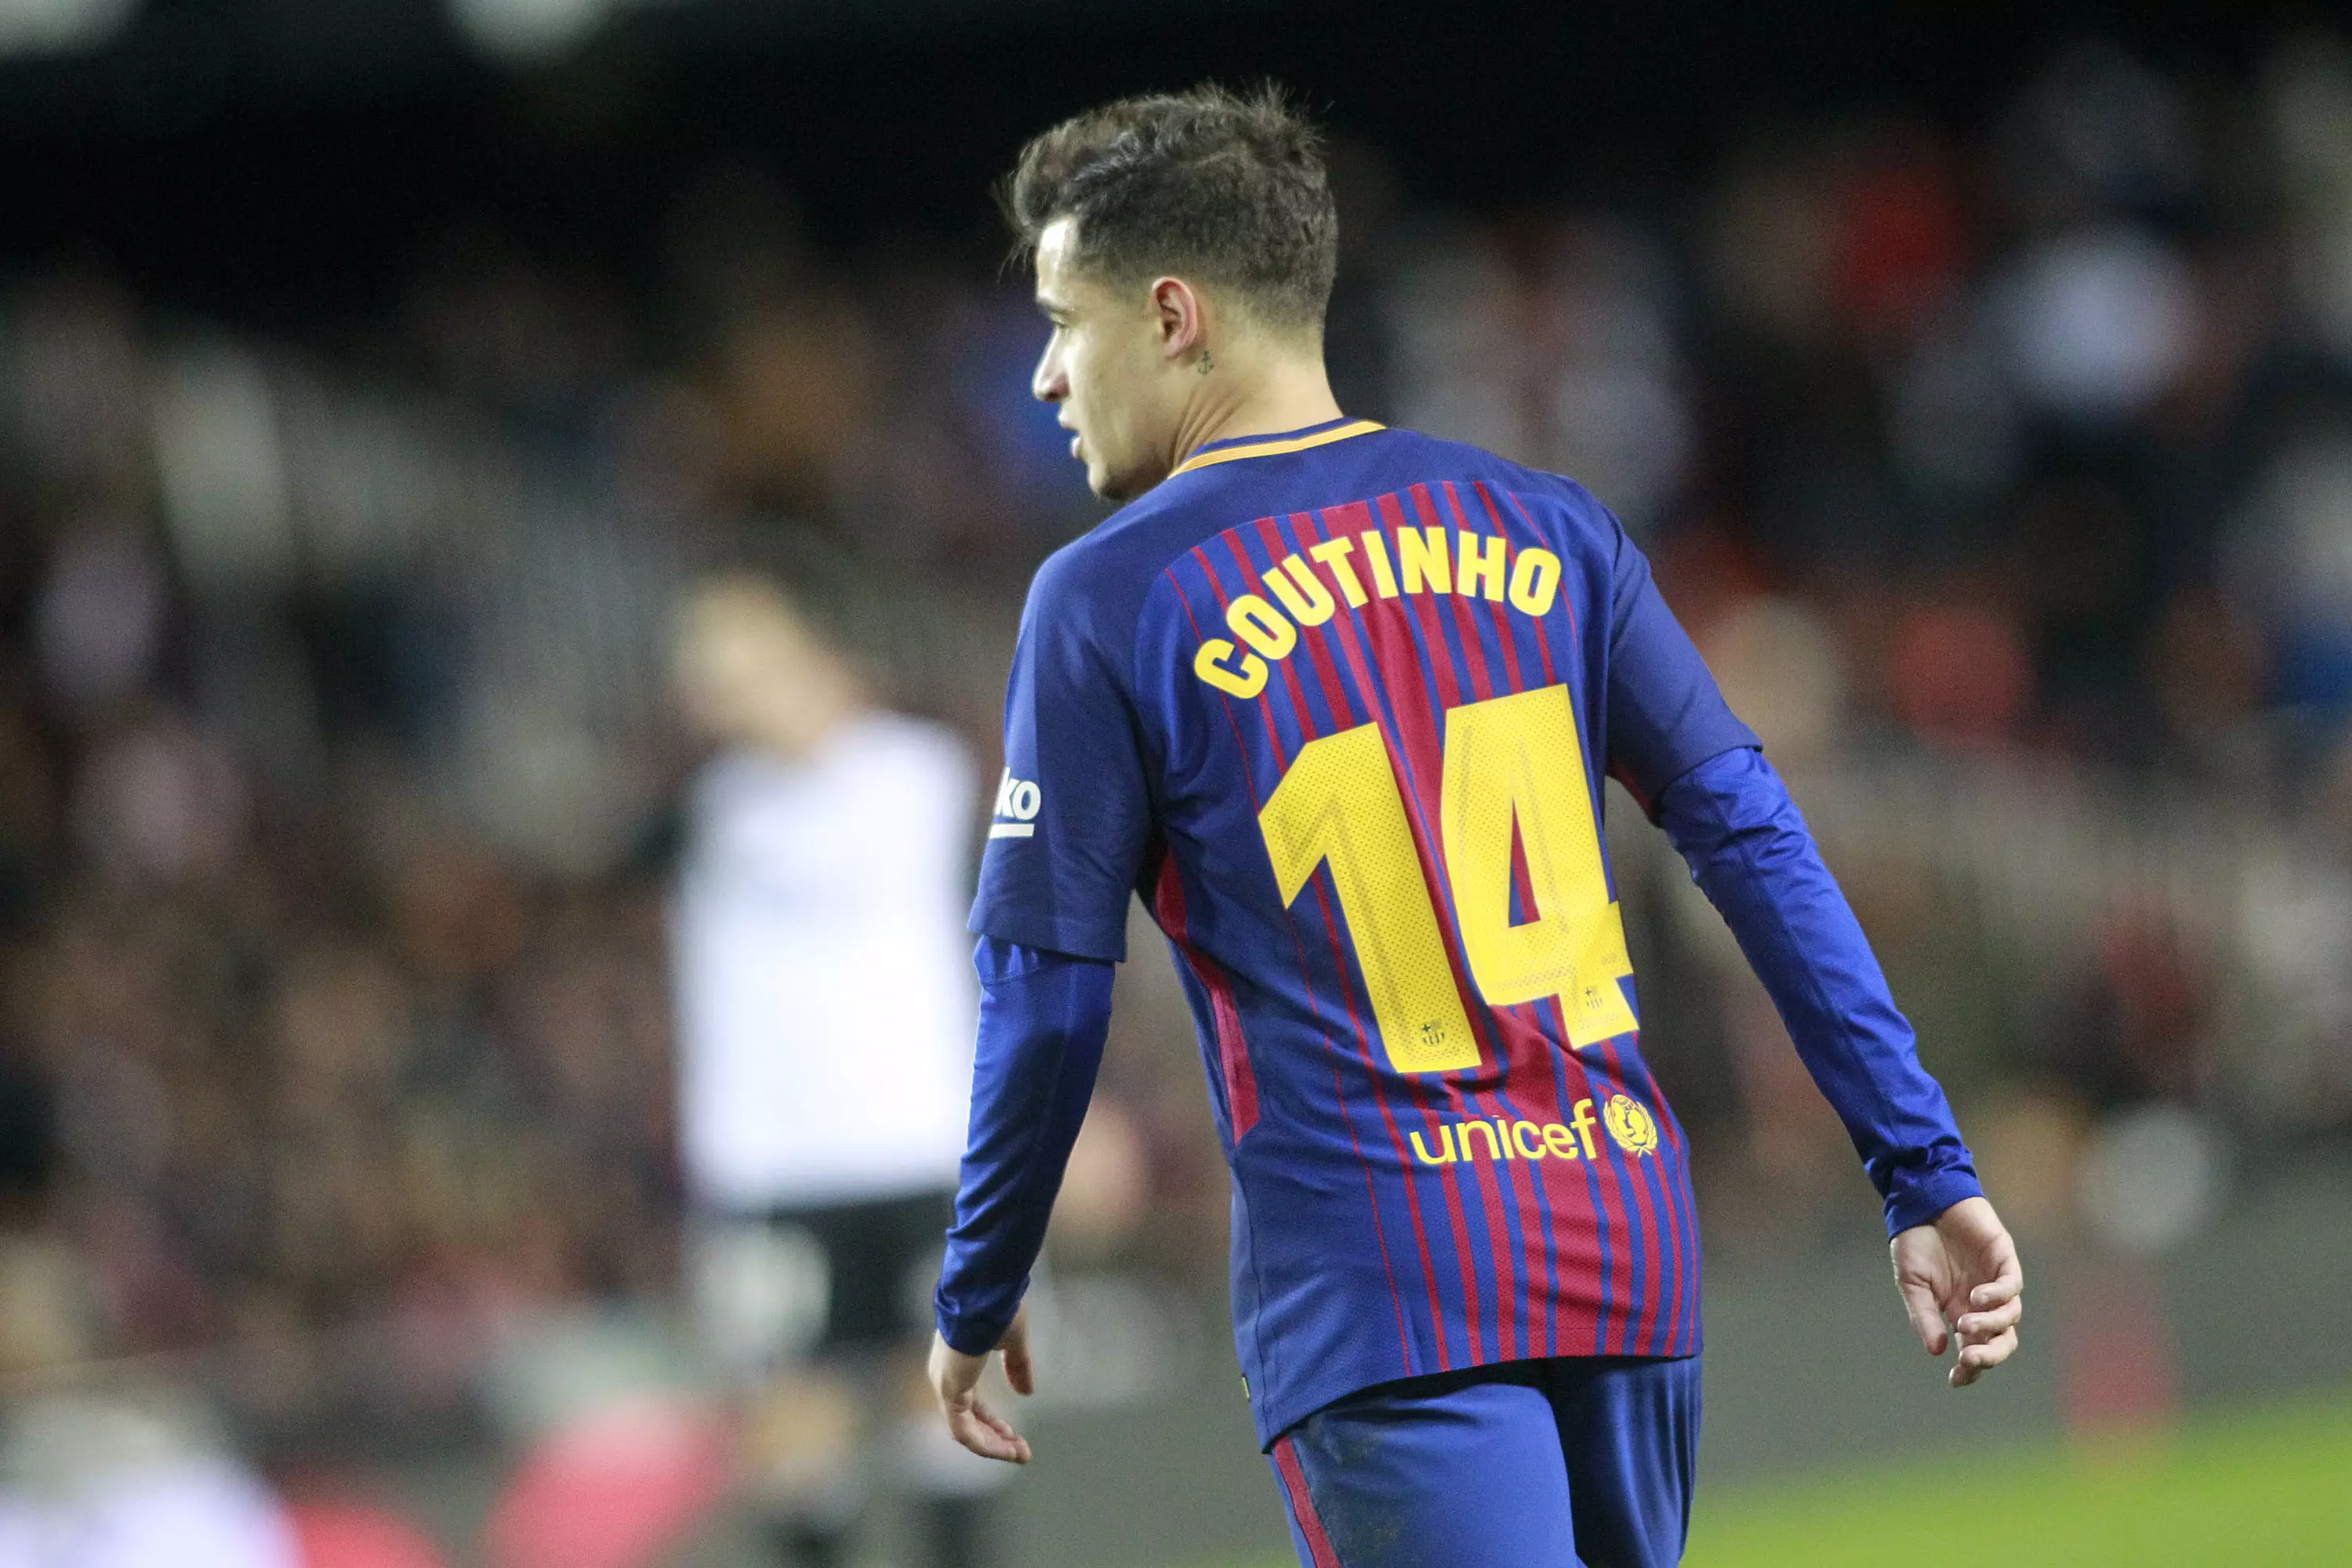 Coutinho has worn 14 at Barca before. Image: PA Images